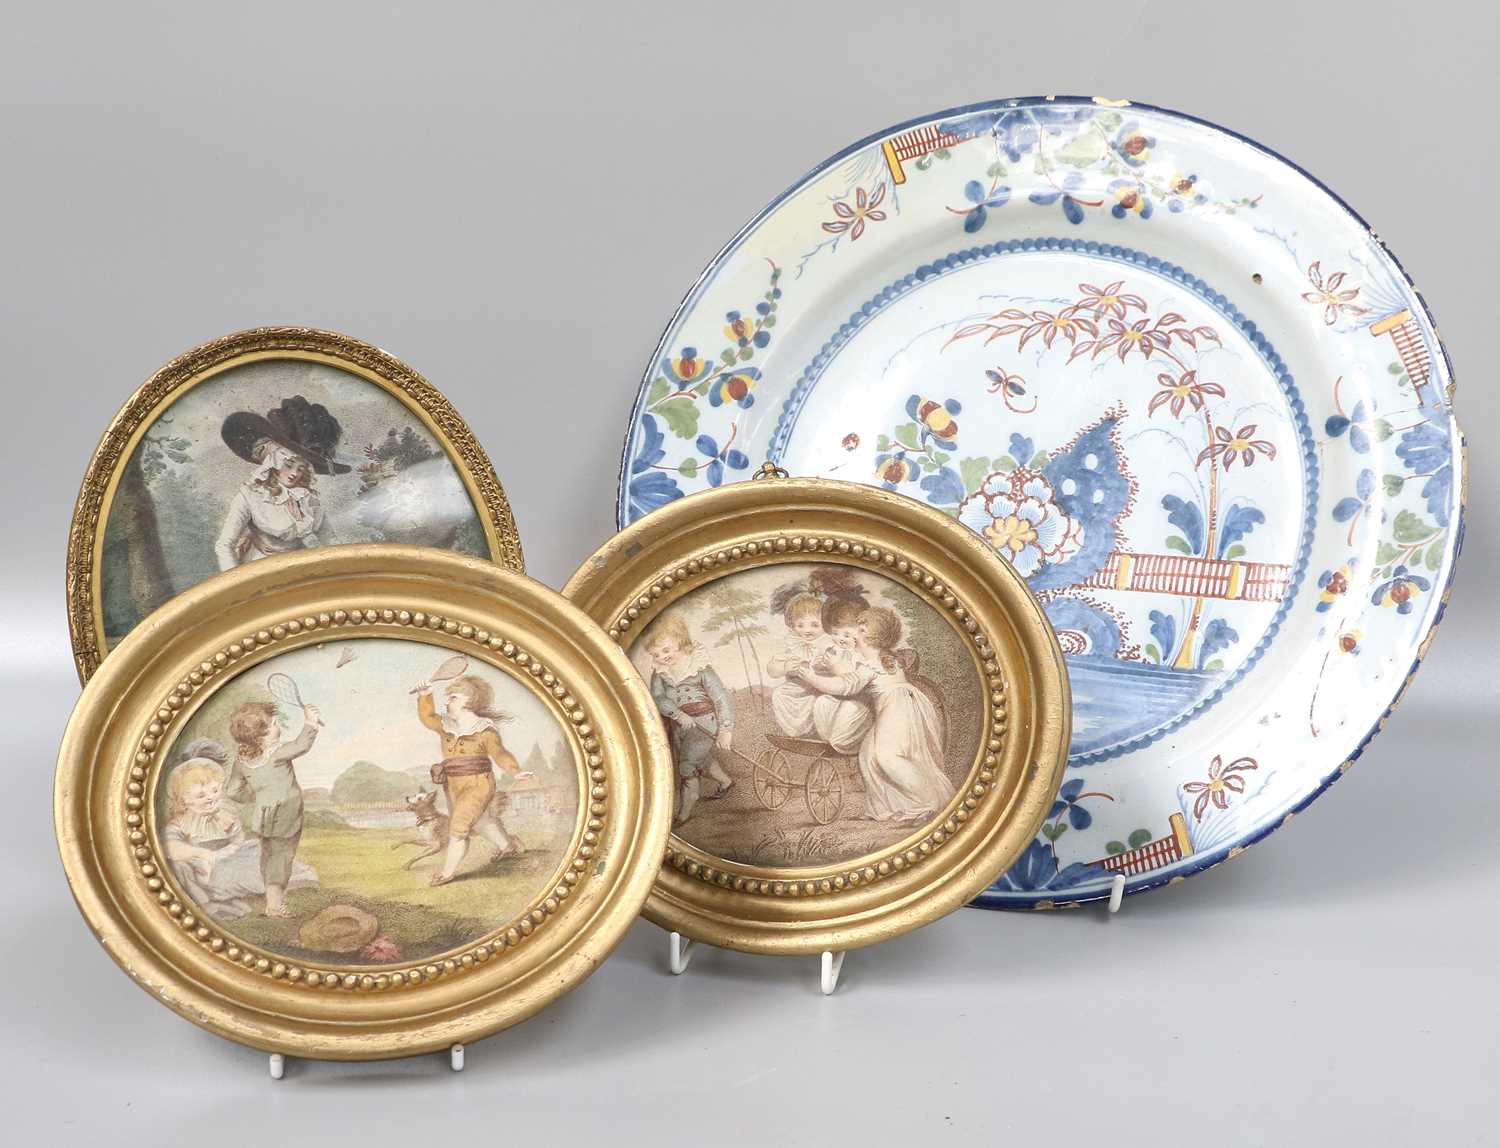 An 18th Century English Delft Charger, circa 1750, together with a Yorkshire pearlware loving cup, - Image 2 of 4